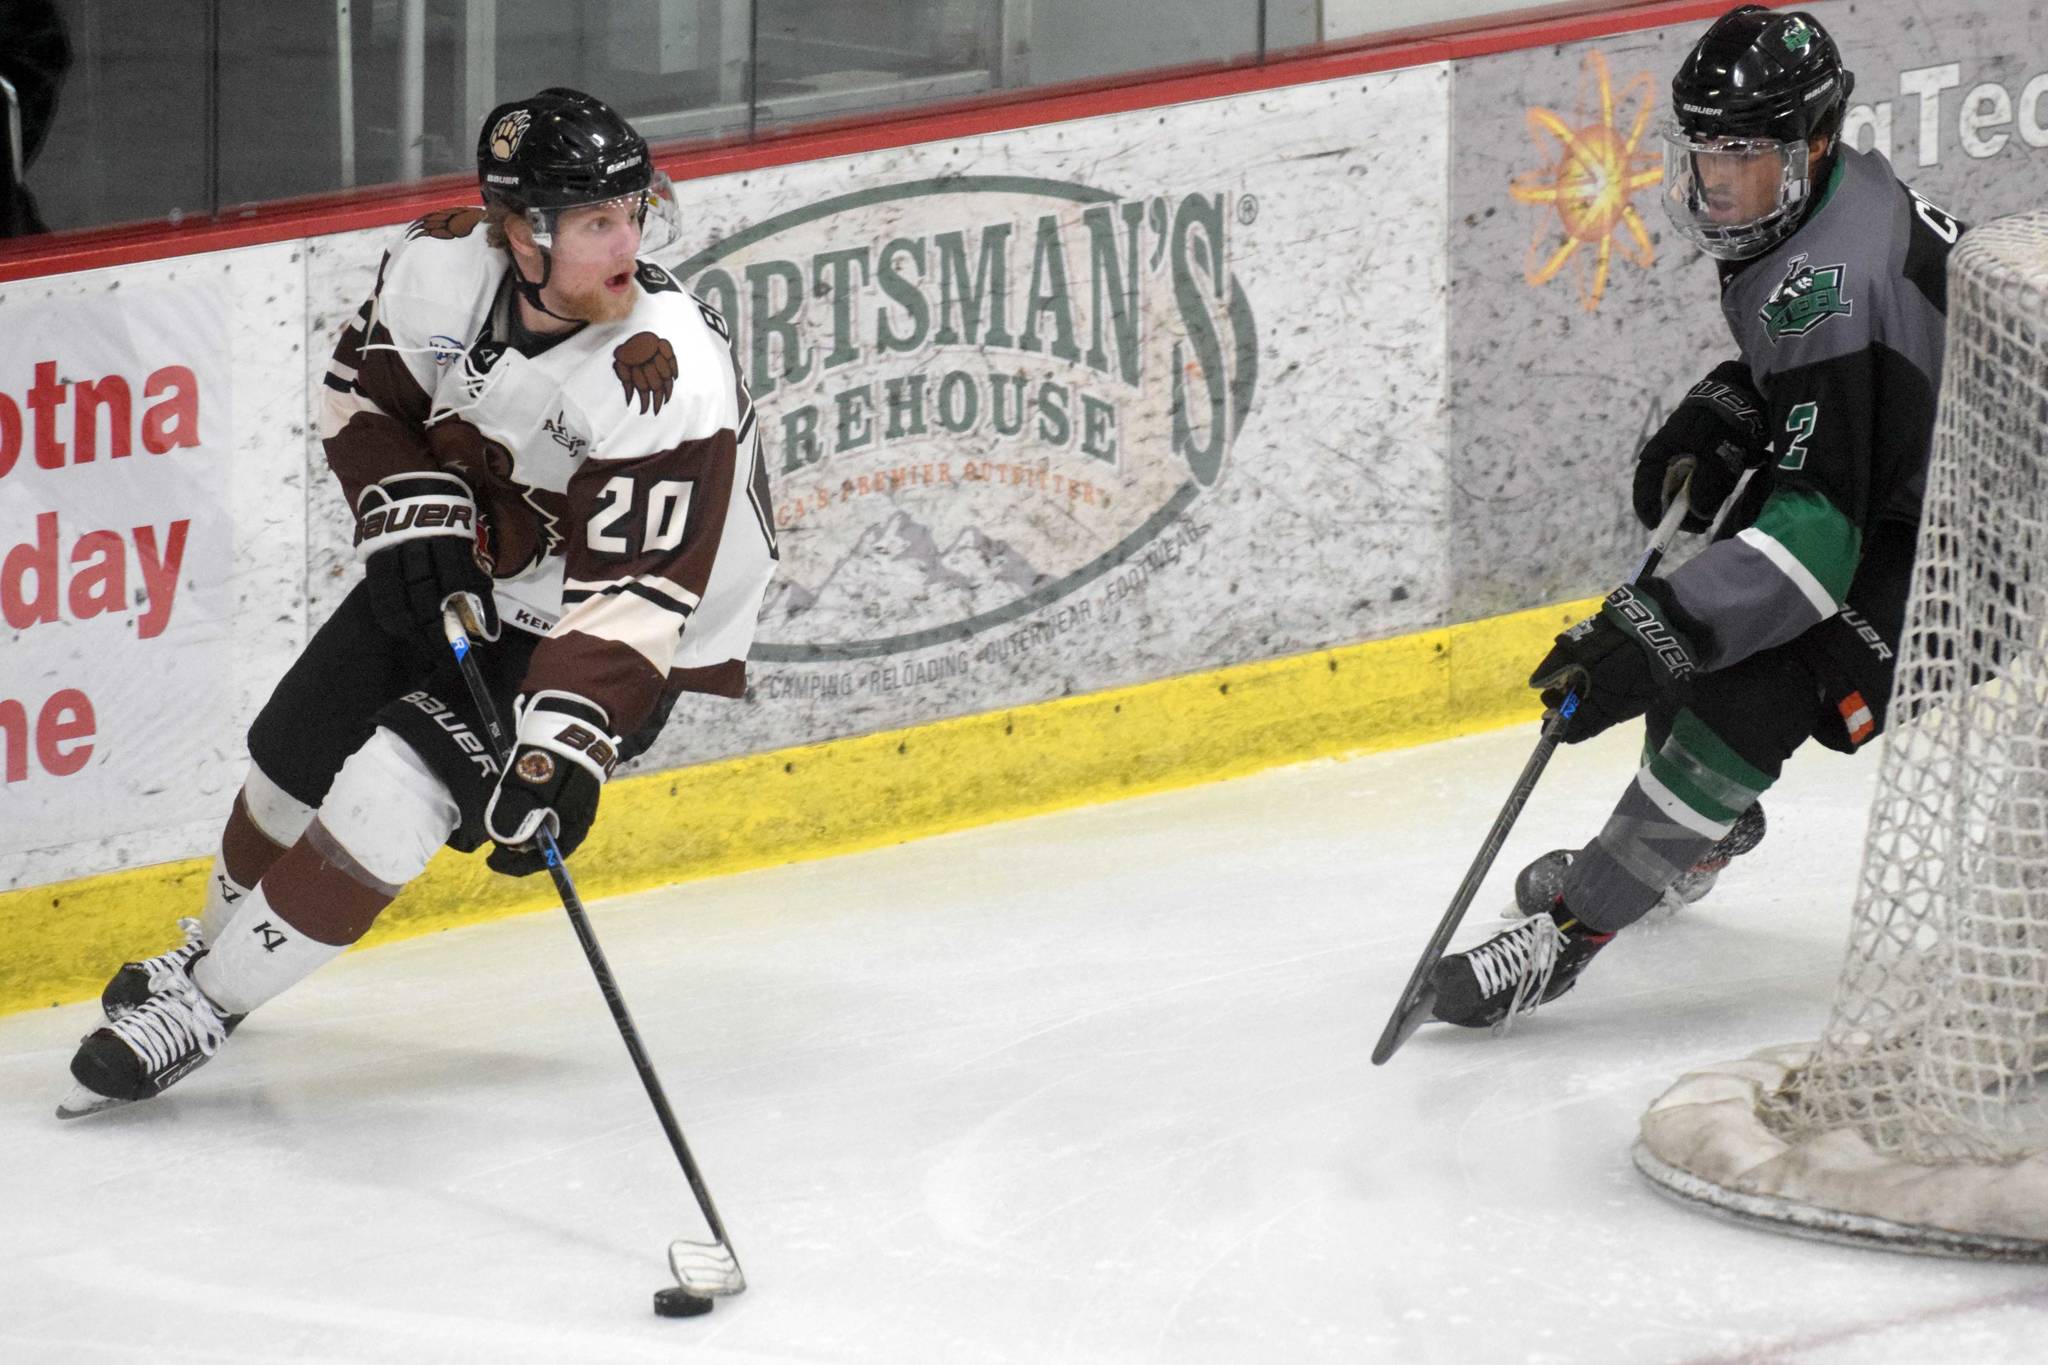 Kenai River Brown Bears forward Cam Blanton looks for an opening against Chippewa (Wisconsin) Steel defenseman Spencer Cox on Friday, April 23, 2021, at the Soldotna Regional Sports Complex. (Photo by Jeff Helminiak/Peninsula Clarion)